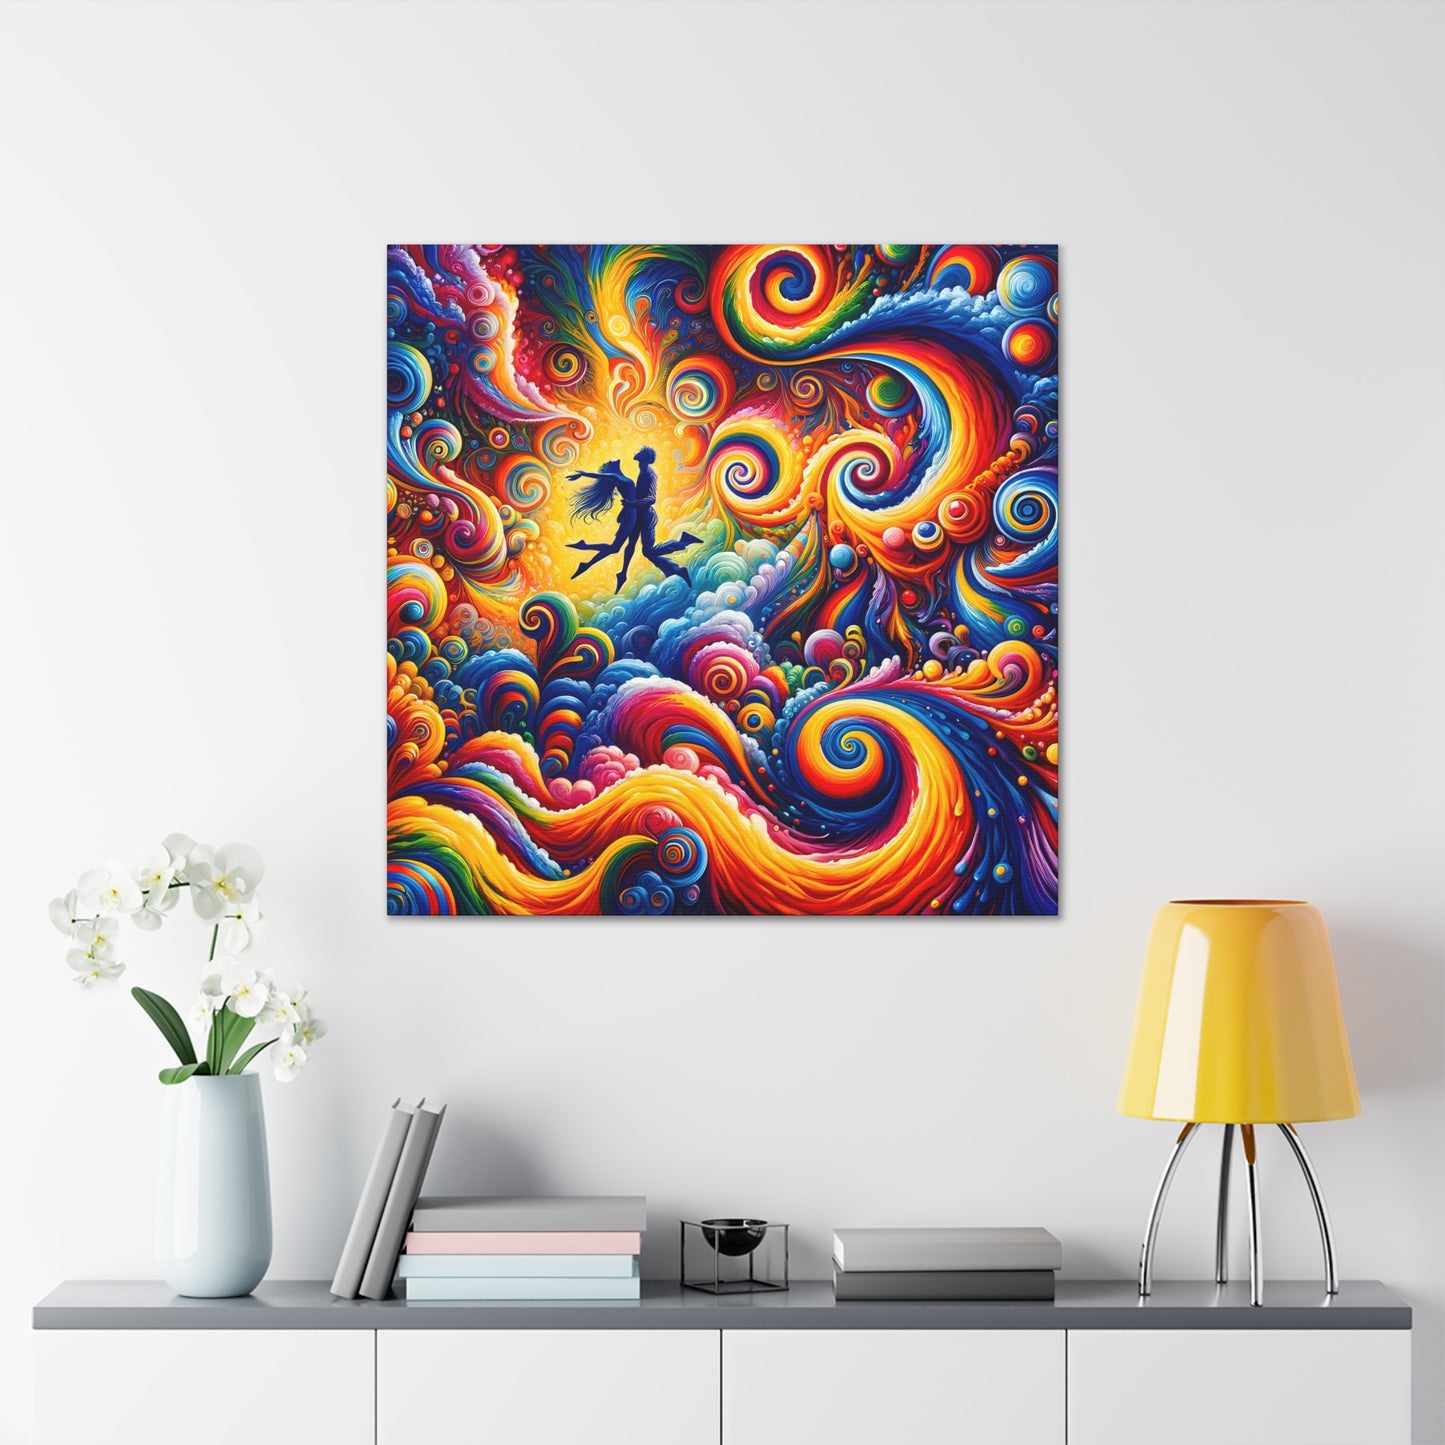 Clara Bellefonte. Embrace of the Cosmos. Exclusive Canvas Print